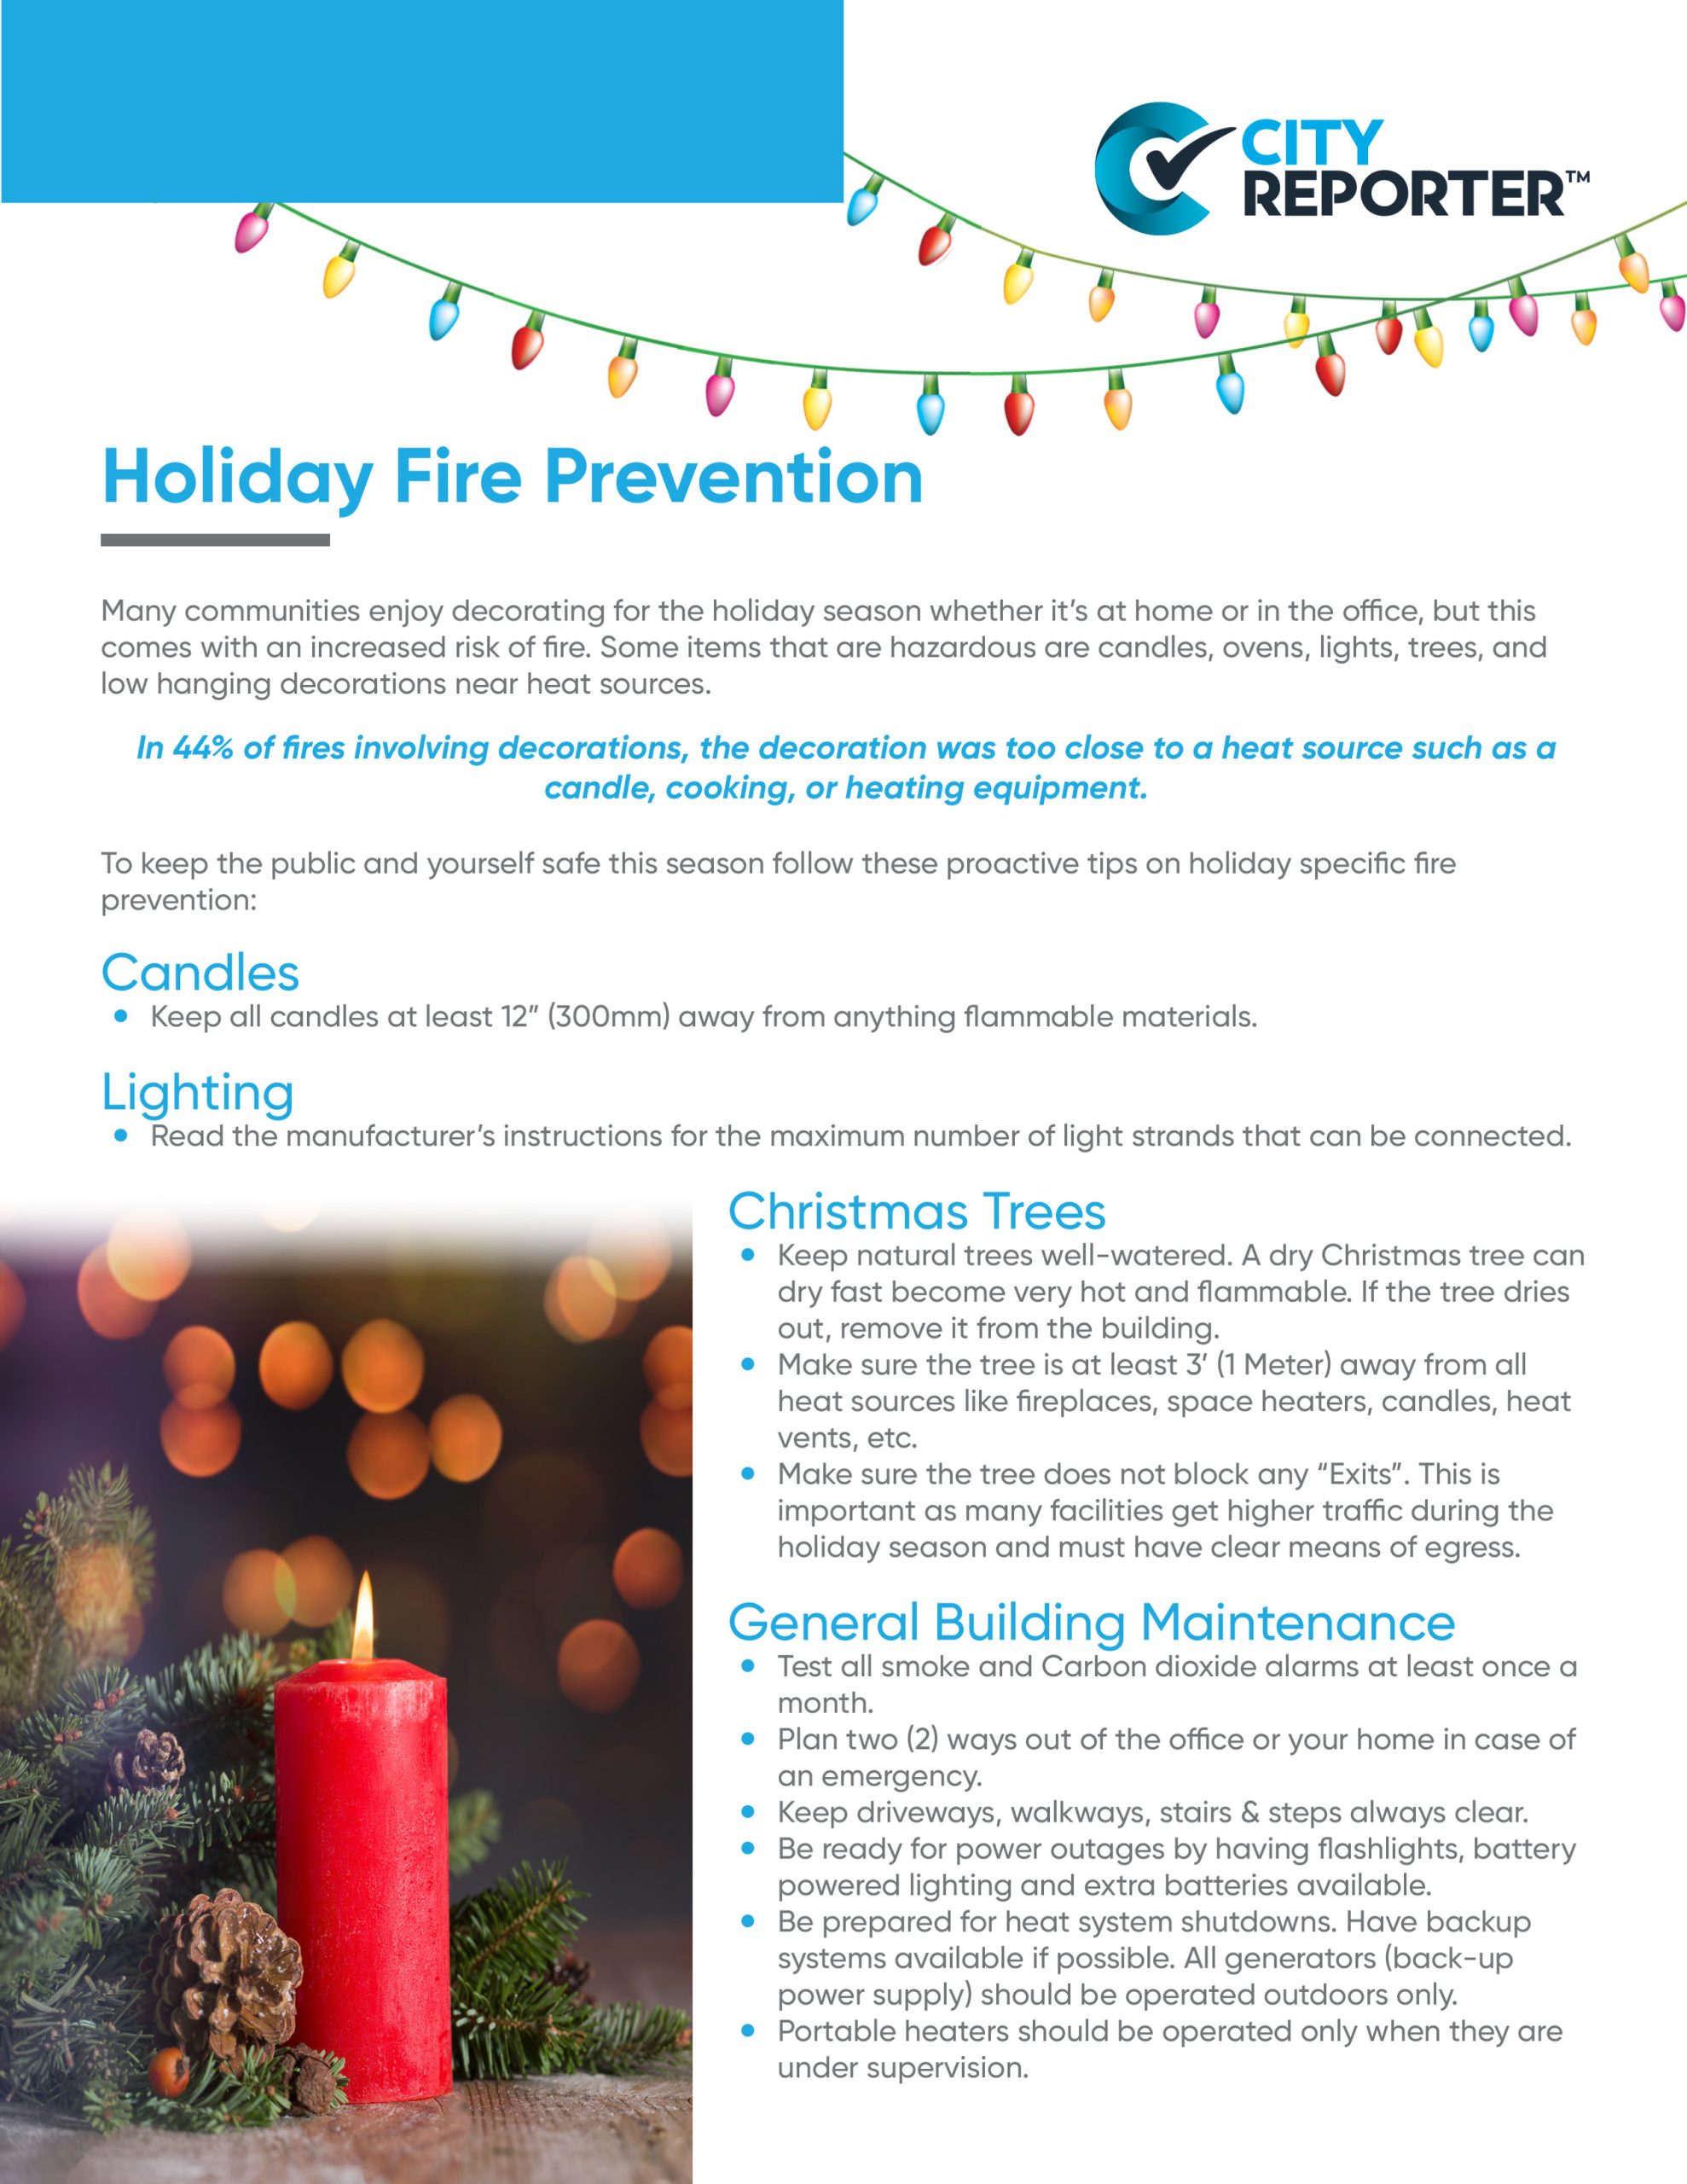 The first page of CityReporter's document - Holiday Fire Prevention Tips